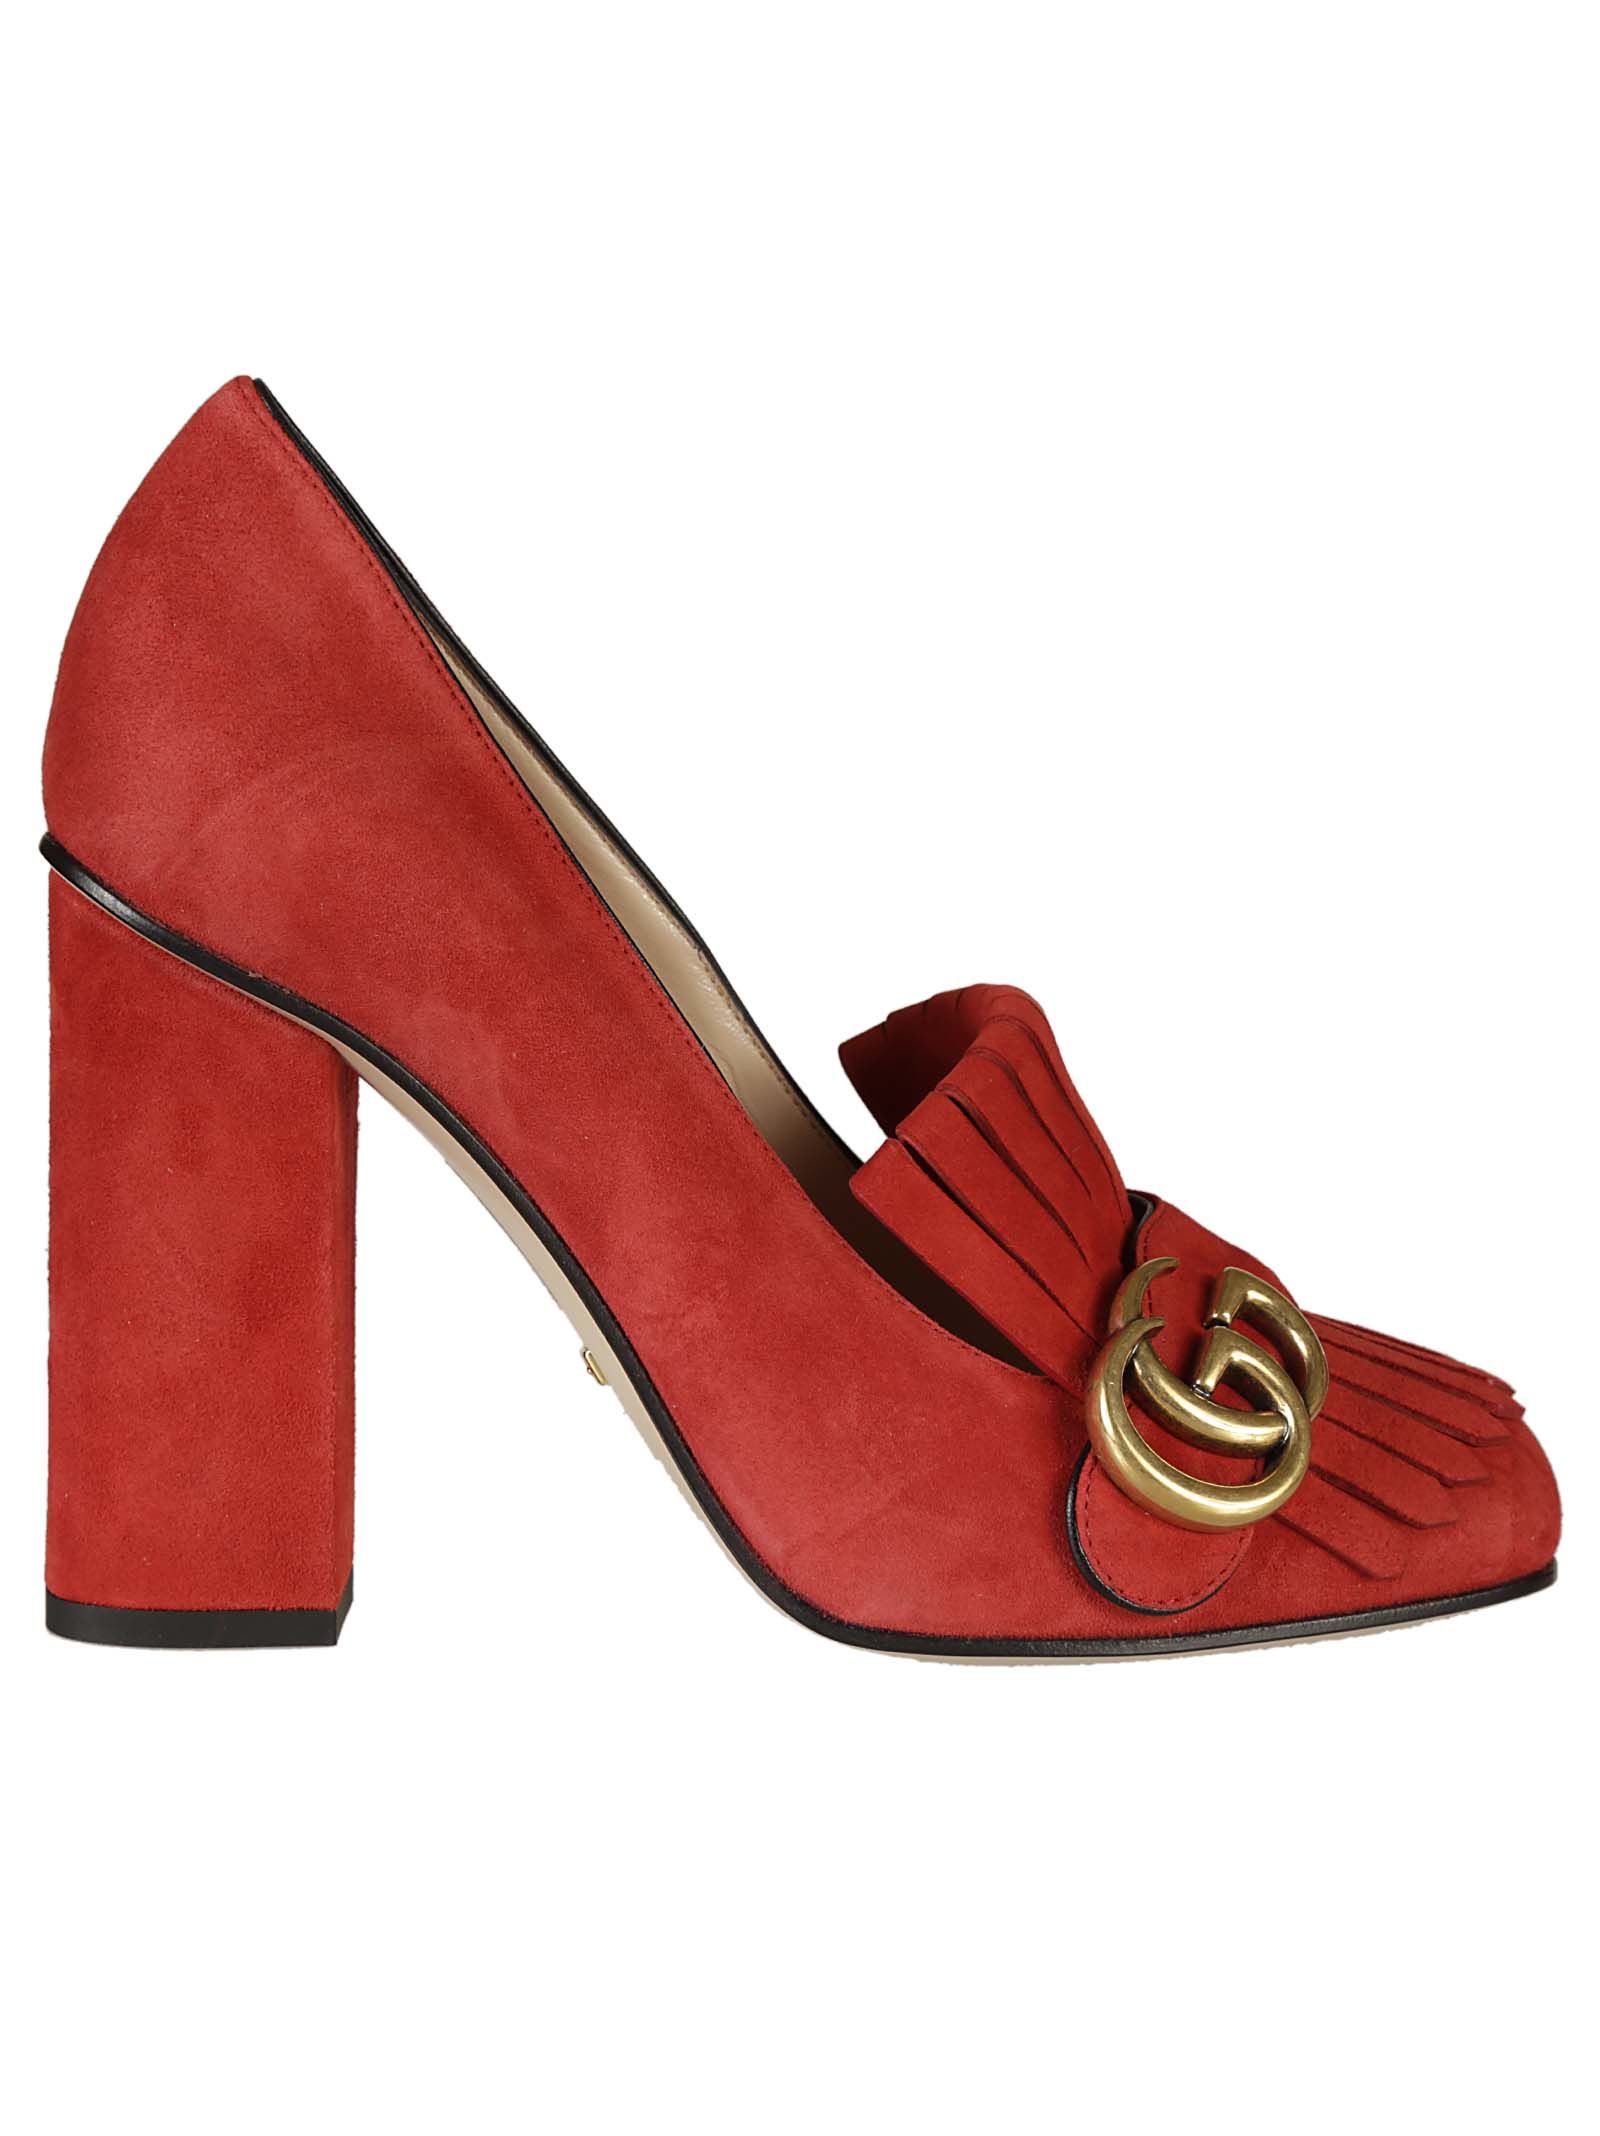 Gucci - Gucci Suede Pumps - Red, Women's High-heeled shoes | Italist